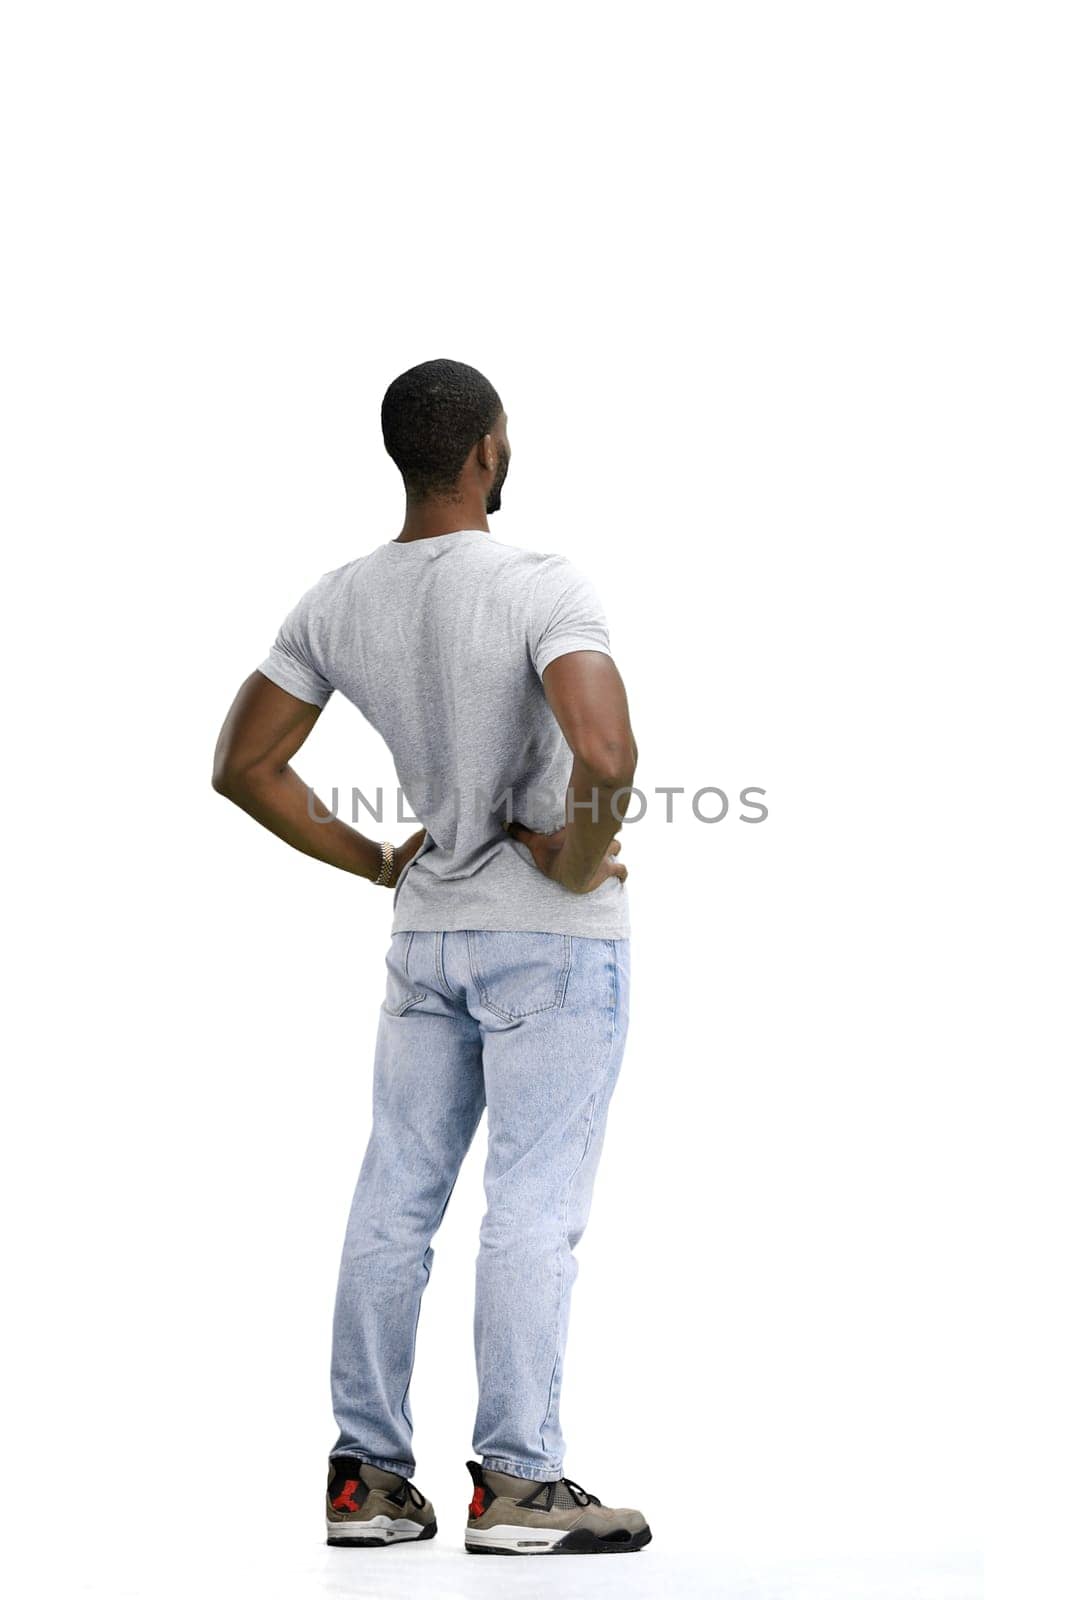 A man, full-length, on a white background, warming up.